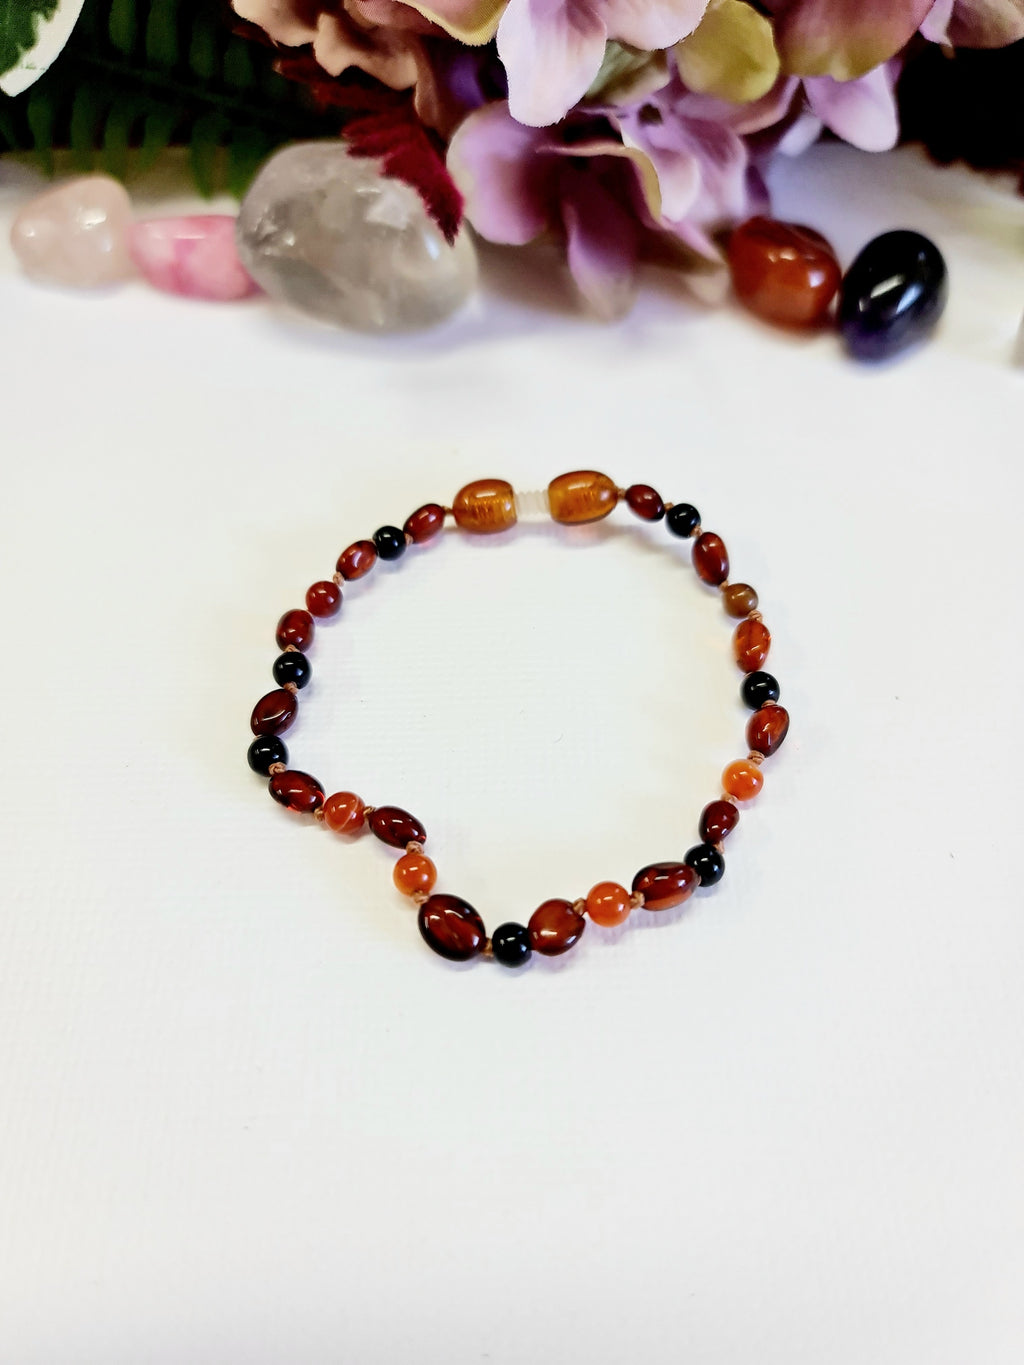 Small Bean-Shaped Dark Cognac Amber with Mixed Striped Agate Adult Bracelet -18cm